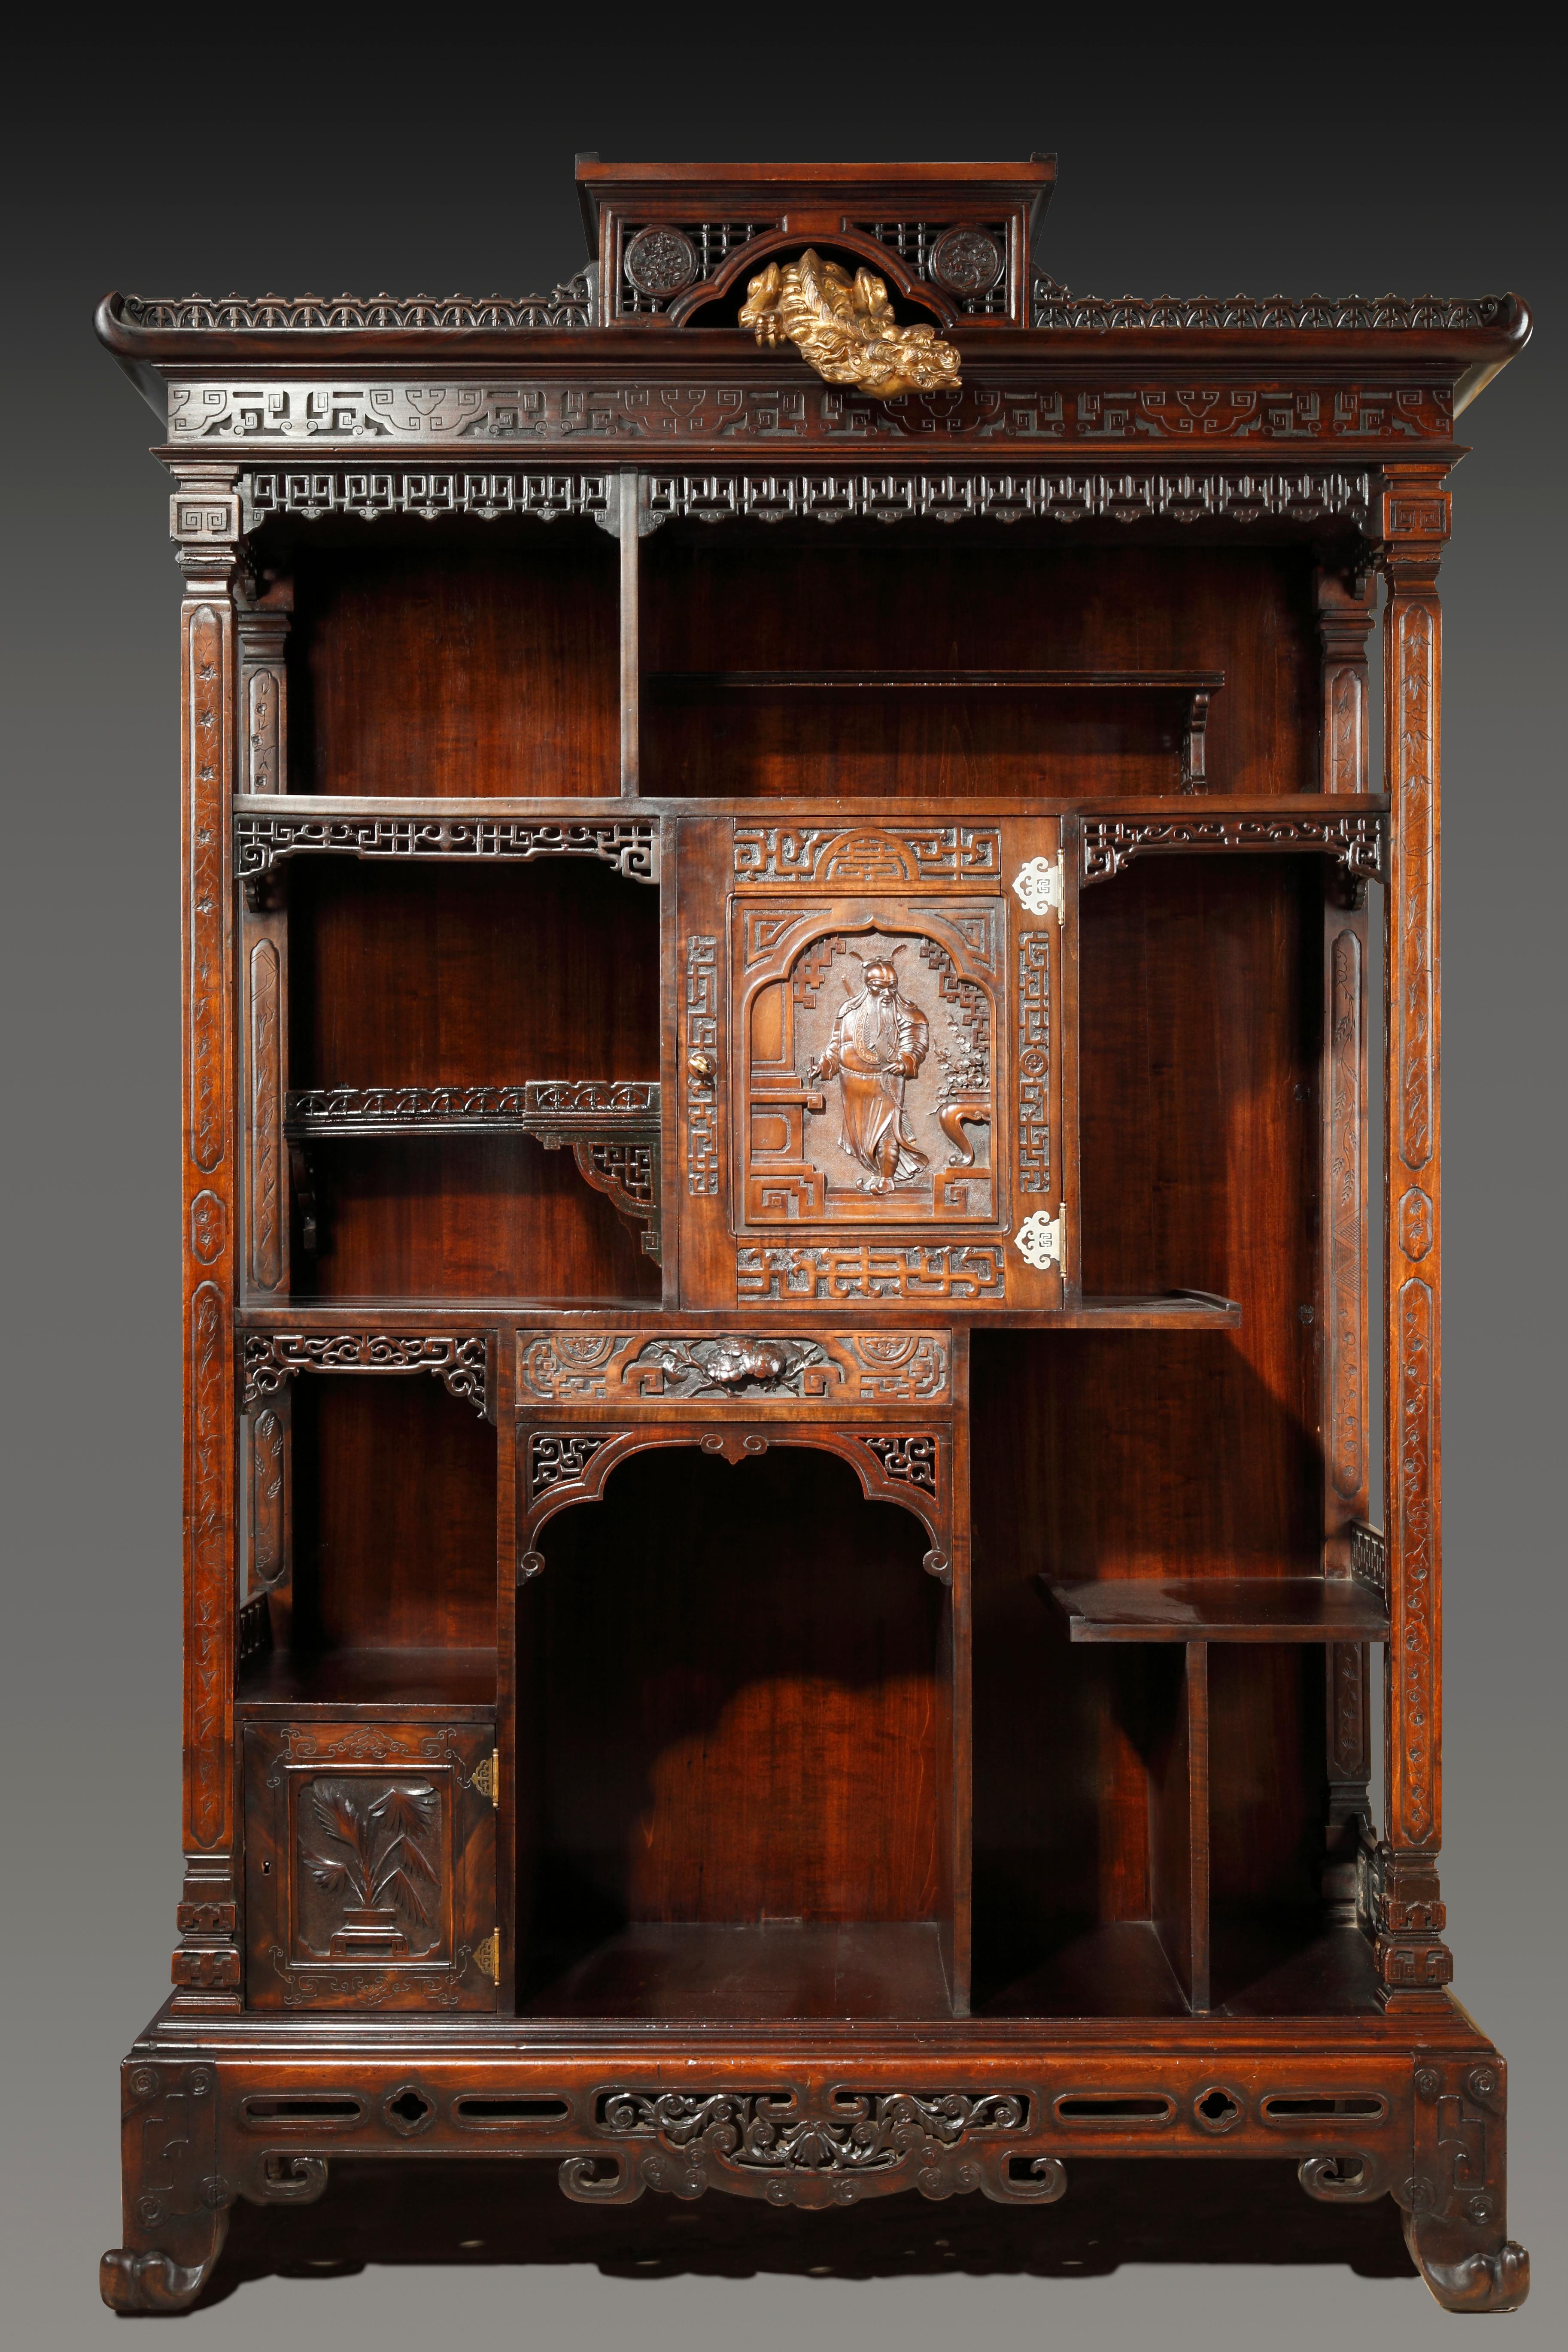 Beautiful Japanese style cabinet attributed to Viardot, made in stained carved wood, composed of asymmetrical niches and shelves underlined with openwork friezes. It opens to a drawer and two doors adorned with foliage and a Samouraï figure. Four